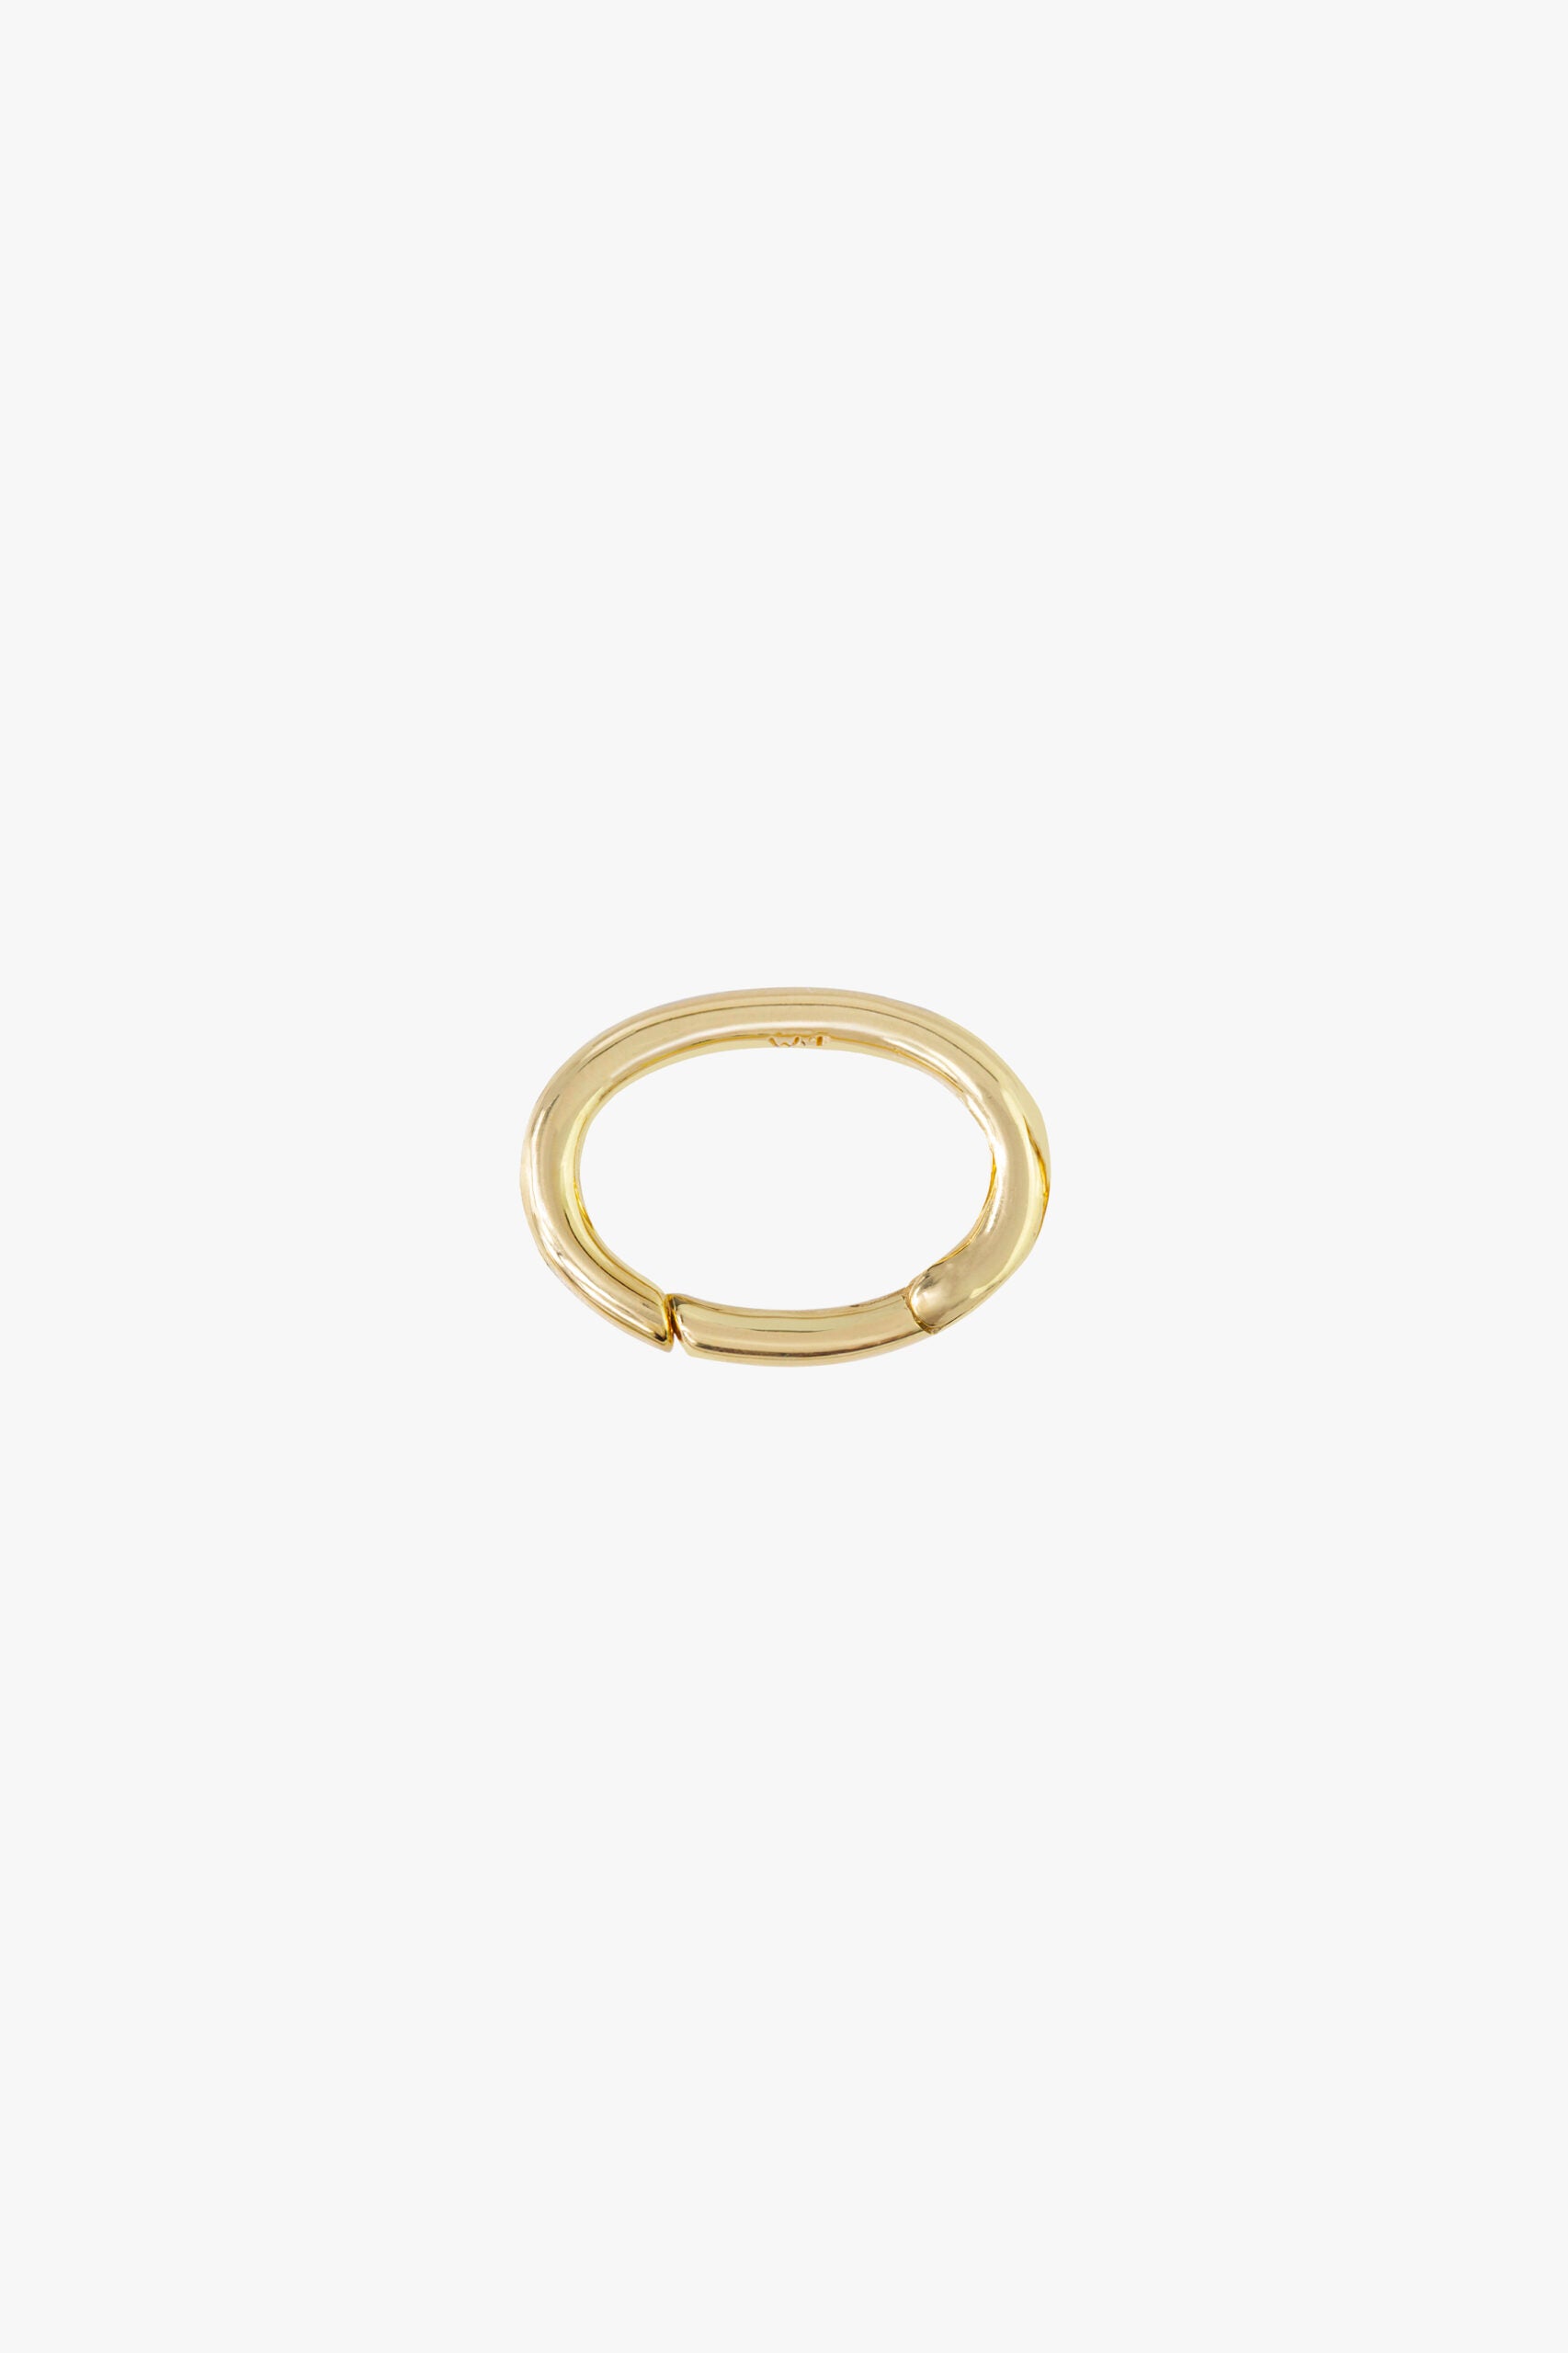 Verschluss Clasp oval Gold | wildthings